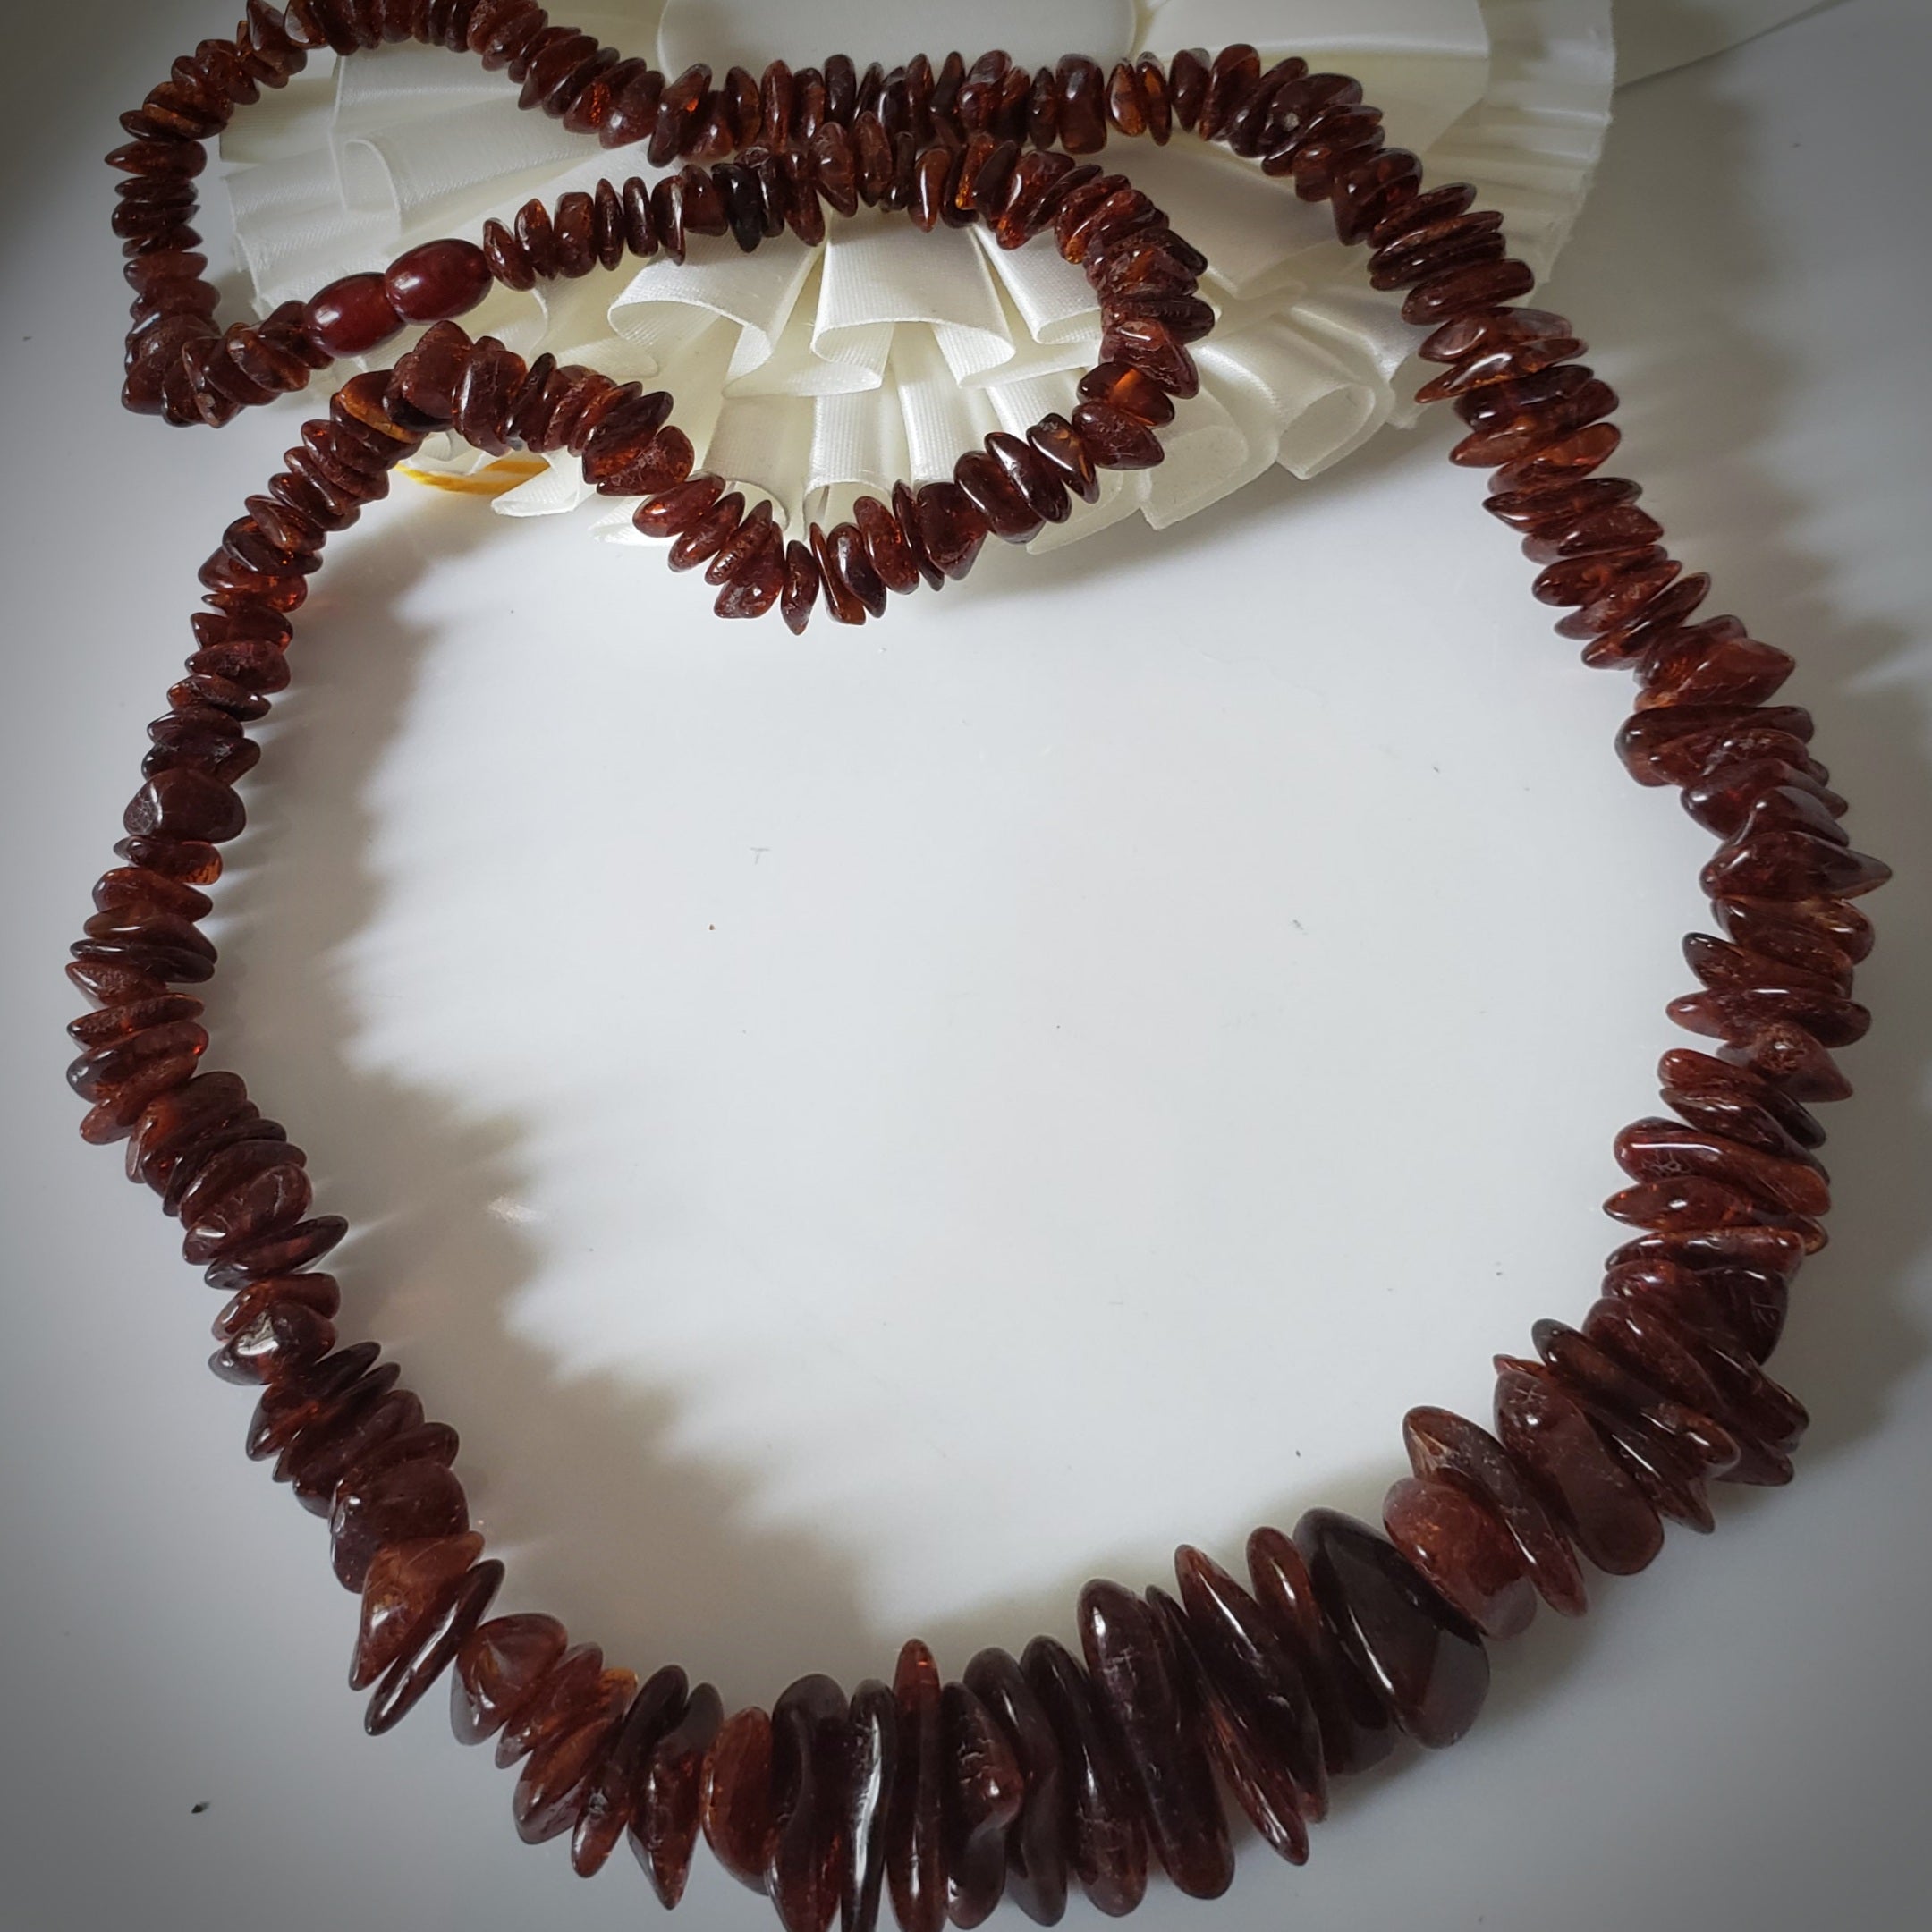 How to Clean Amber Jewelry and Beads